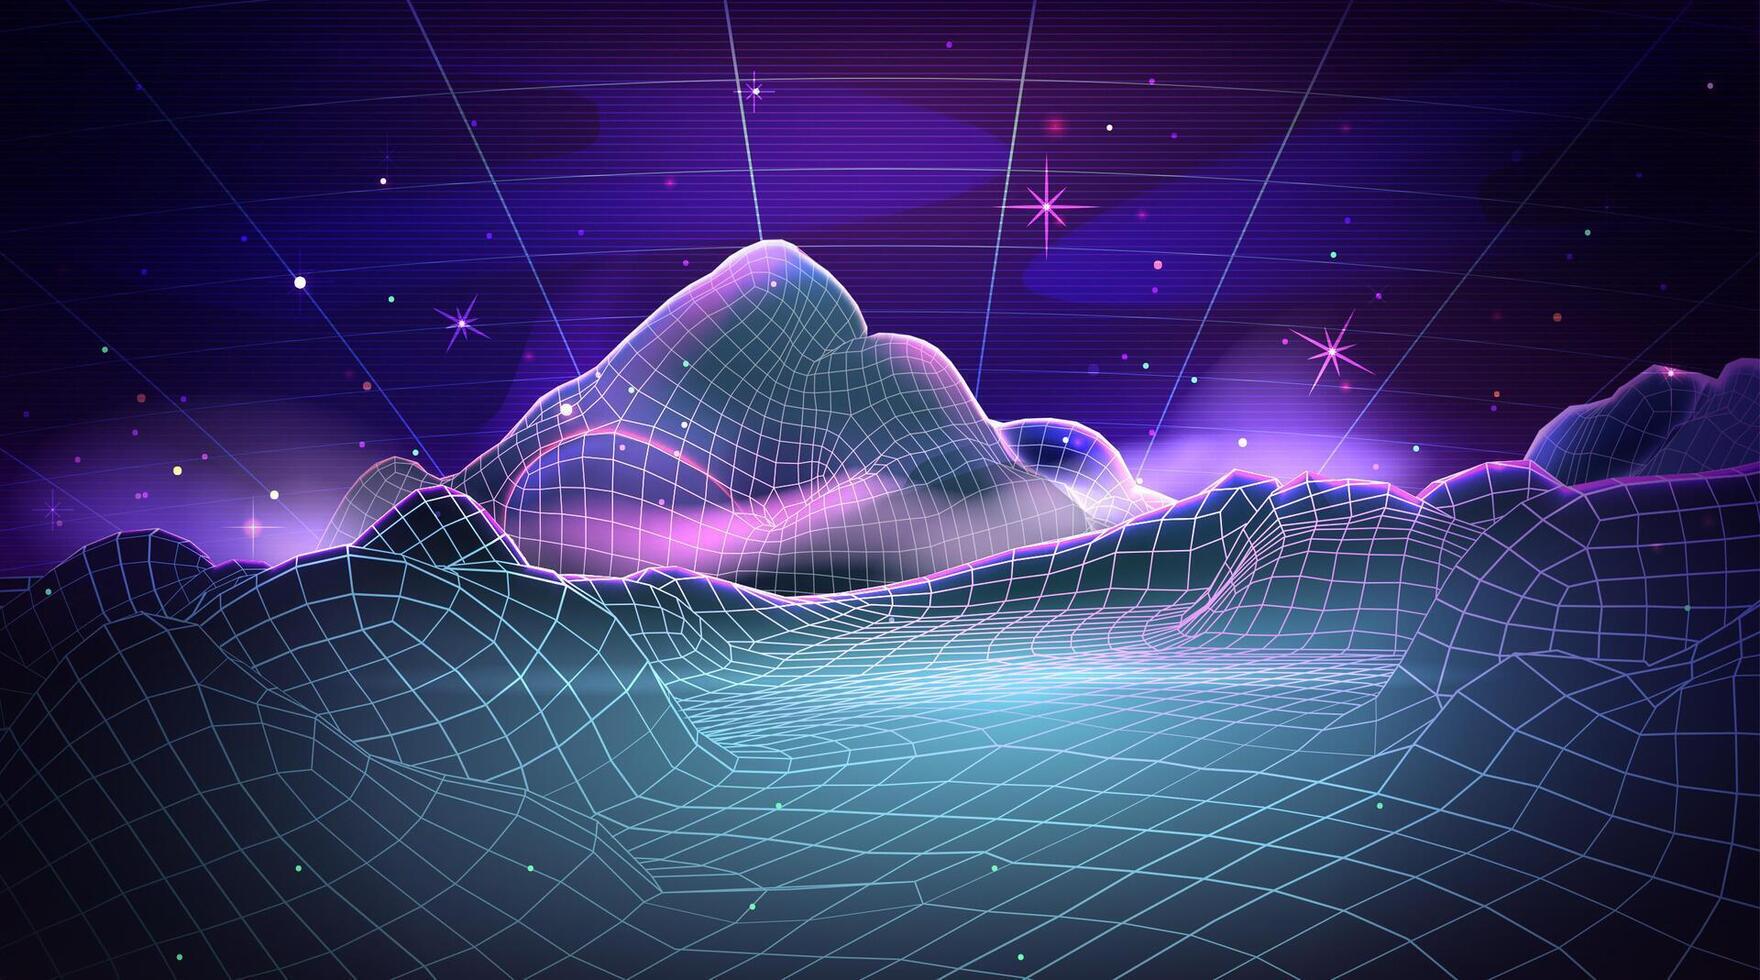 Abstract futuristic landscape with neon wireframe mountain and galaxy night sky. Vector illustration of 80s retro sci fi background with laser grid perspective, glowing scenery in vaporwave style